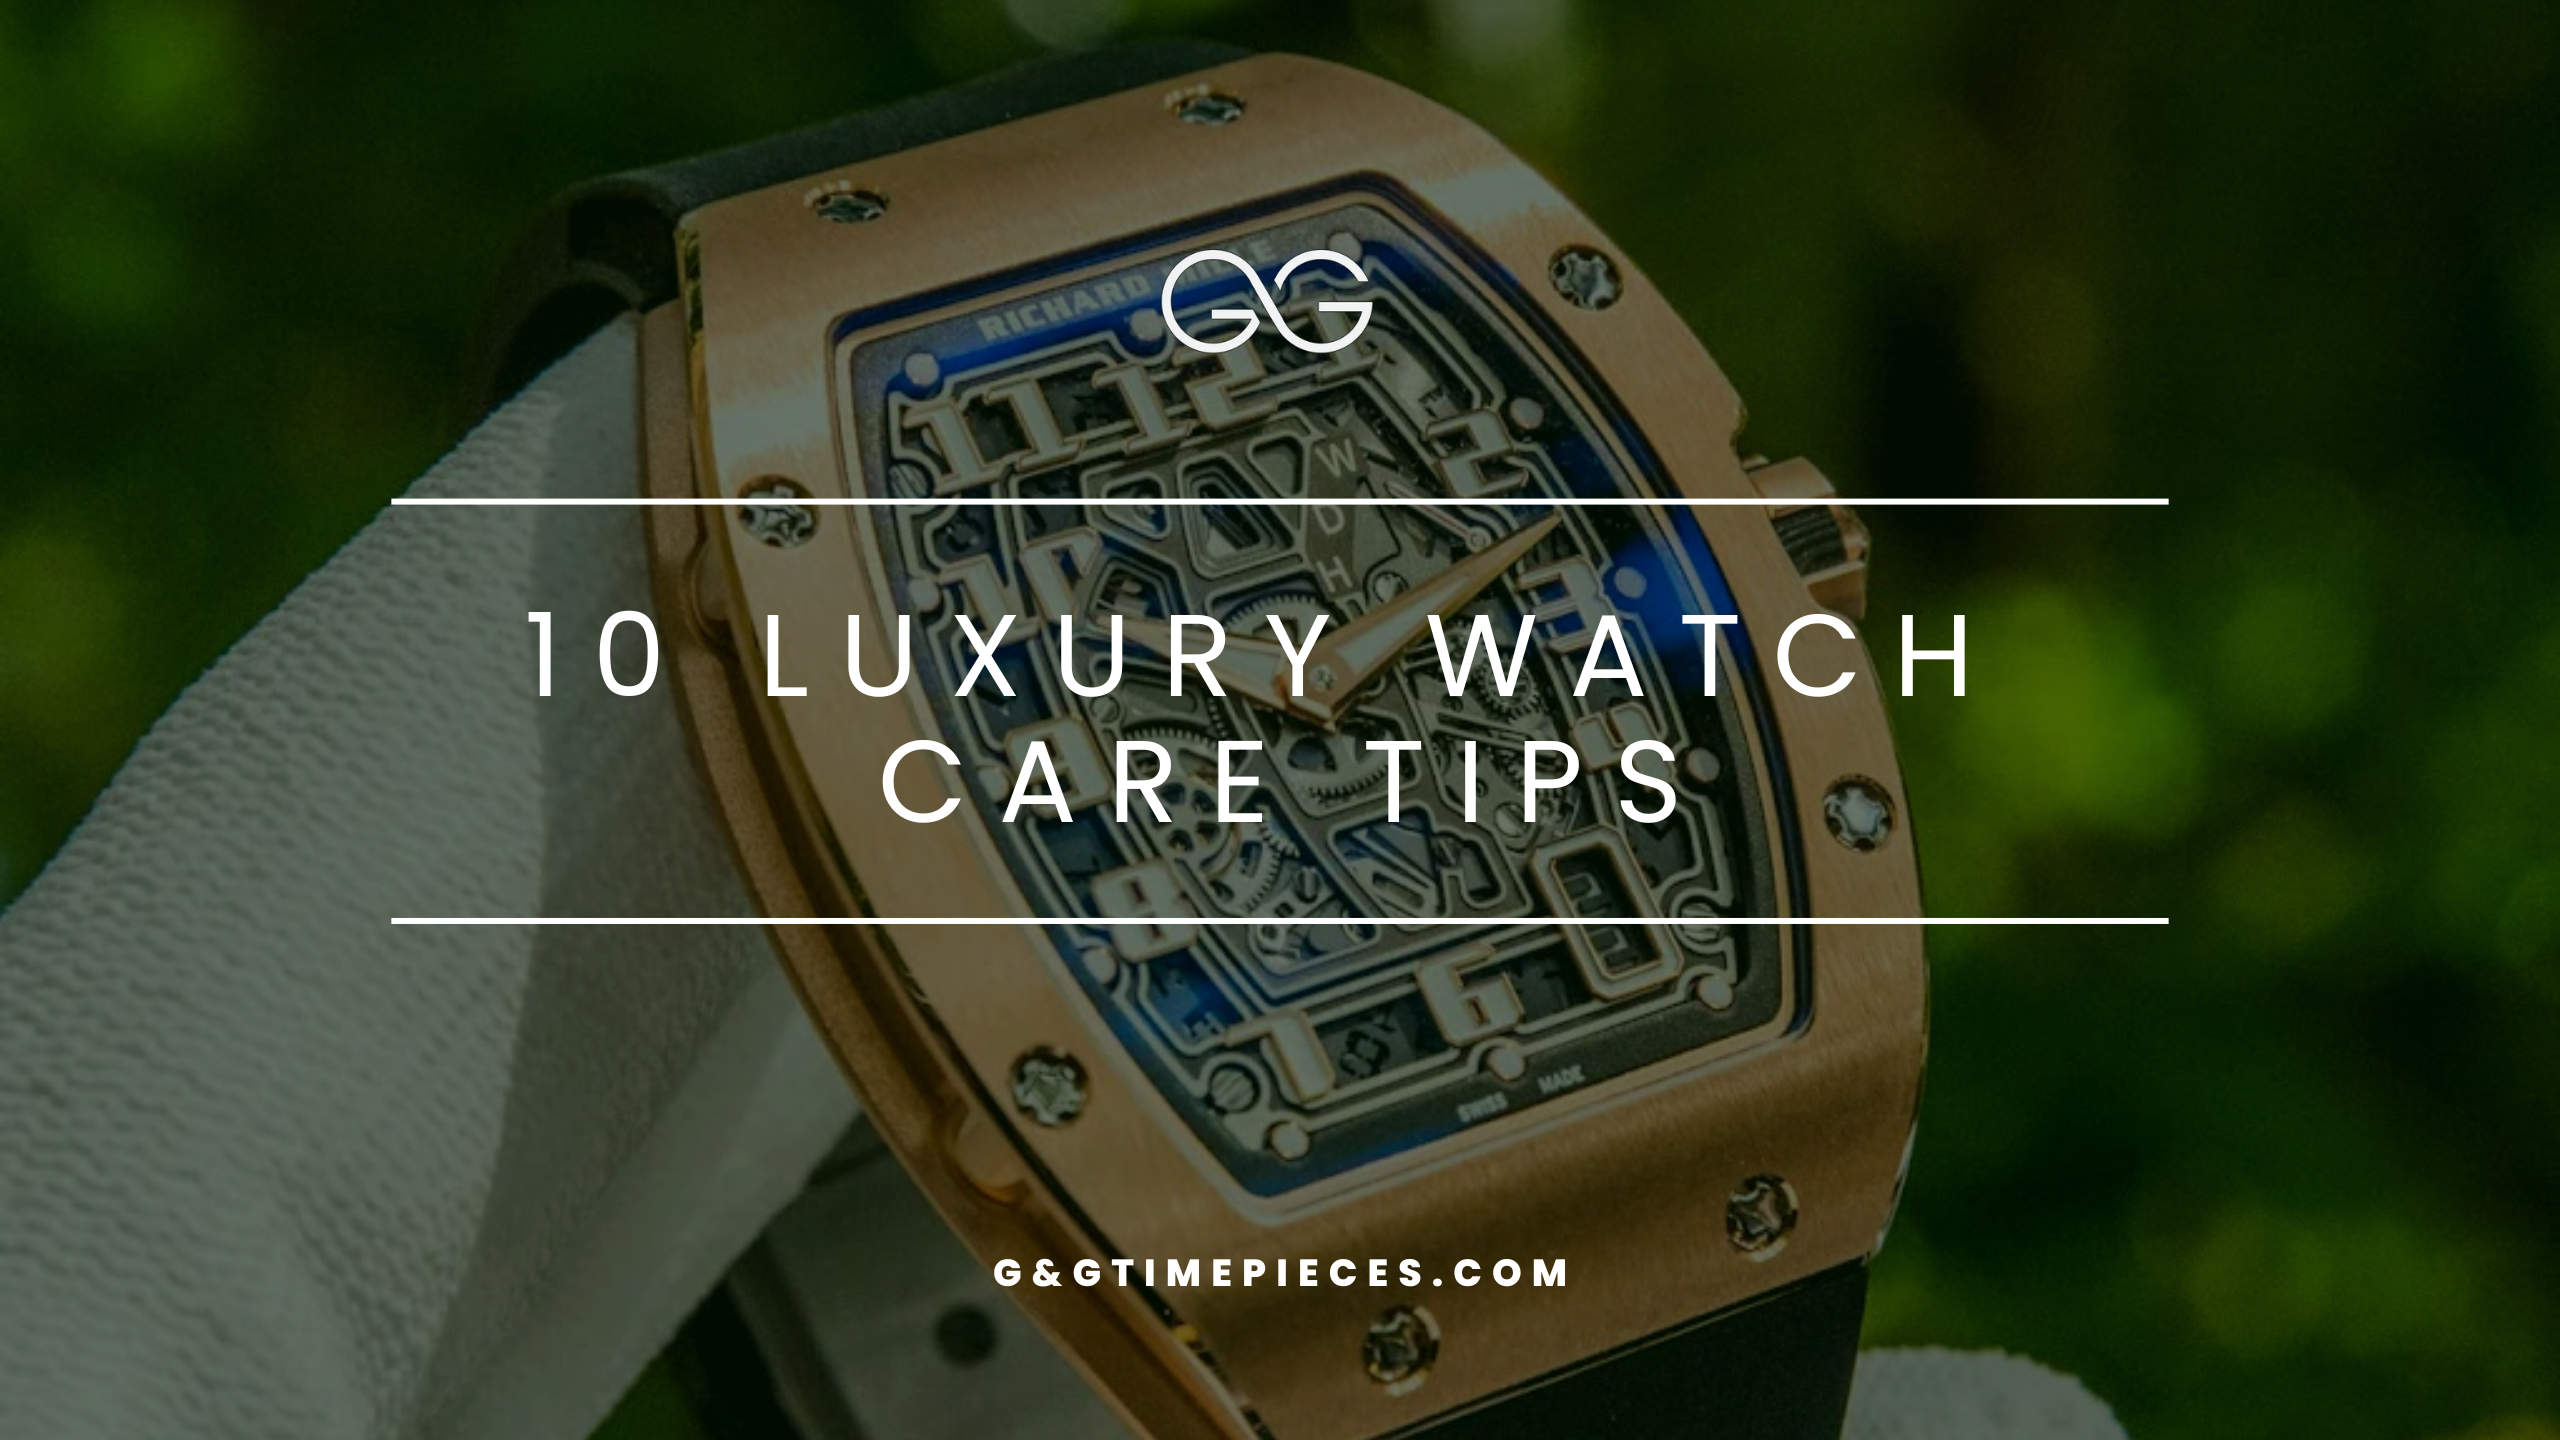 Luxury Watch Care Tips